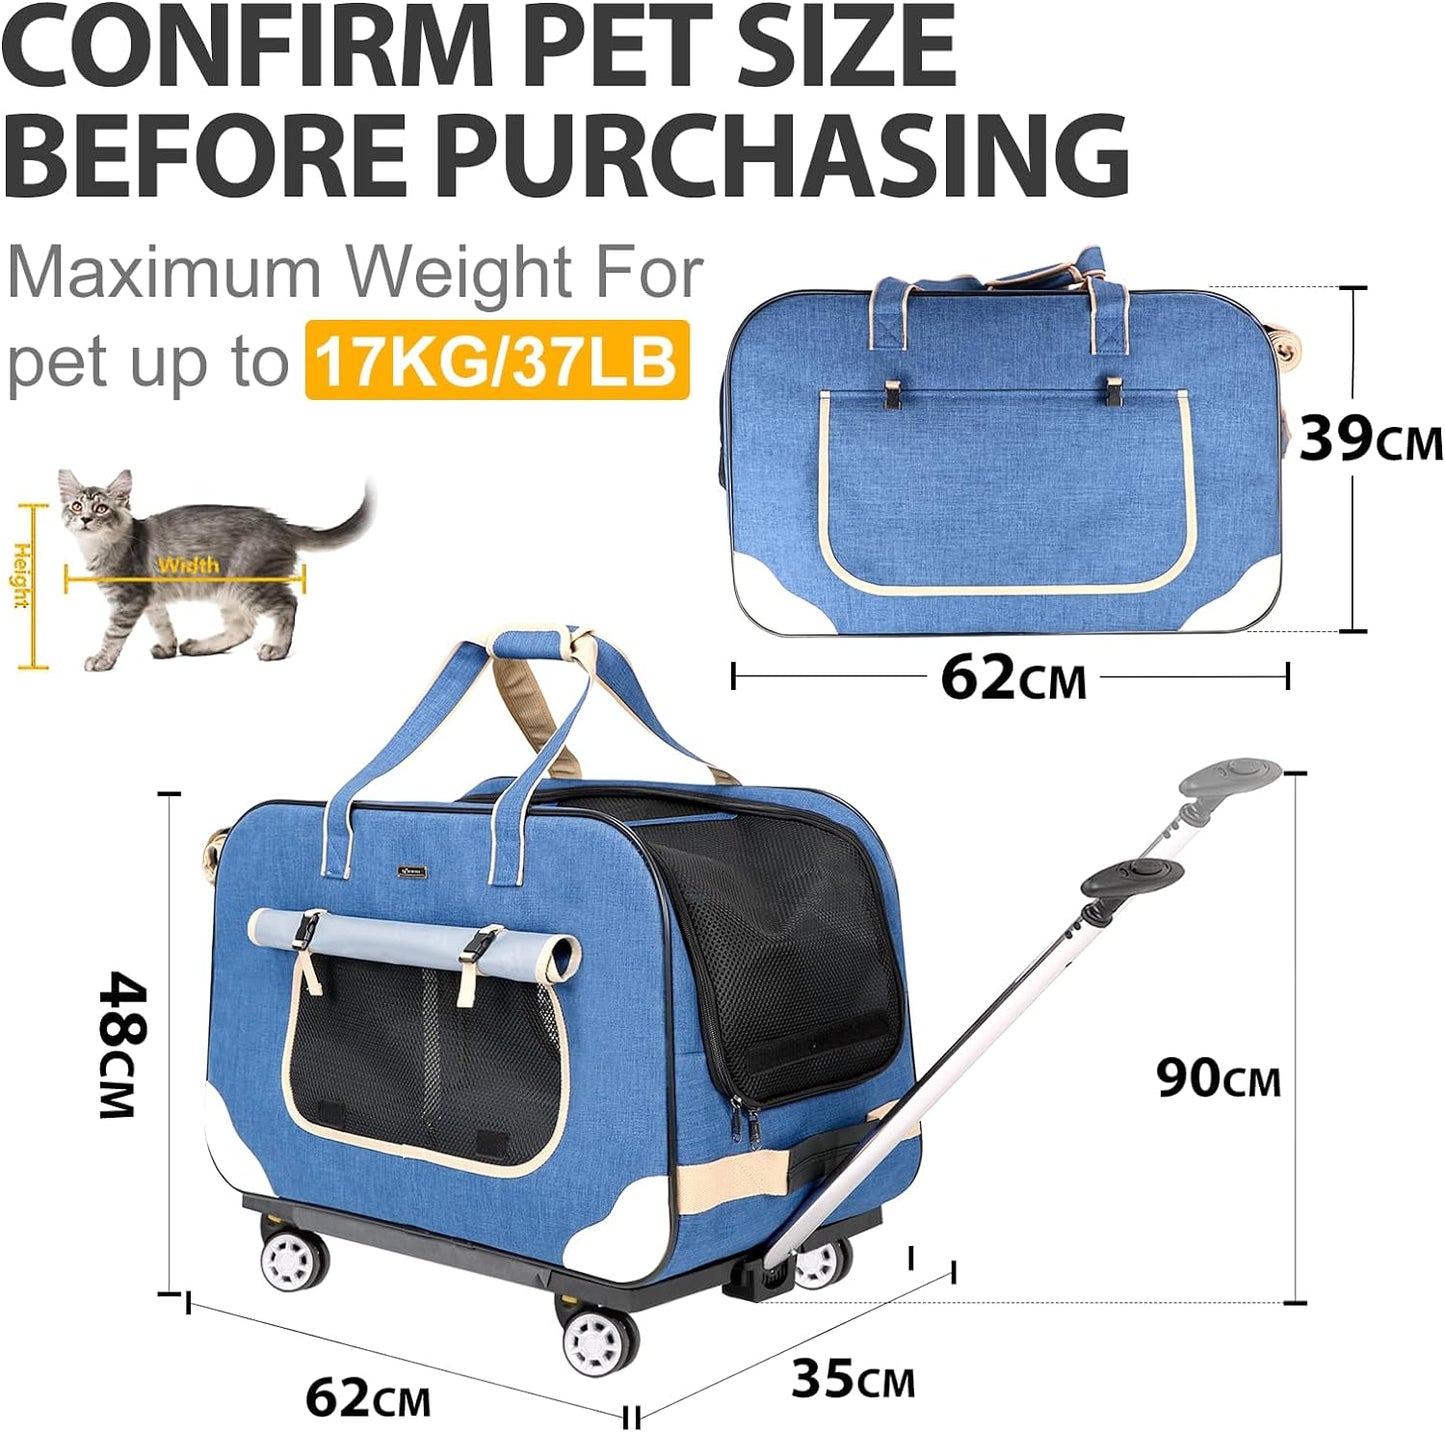 Dog Carrier On Wheels,Dog Carrier with Wheels for Small Dog,Rolling Dog Carrier with Wheel,Pet Trolley Case Carrier for Small Dog,Pet Carrier with Wheels